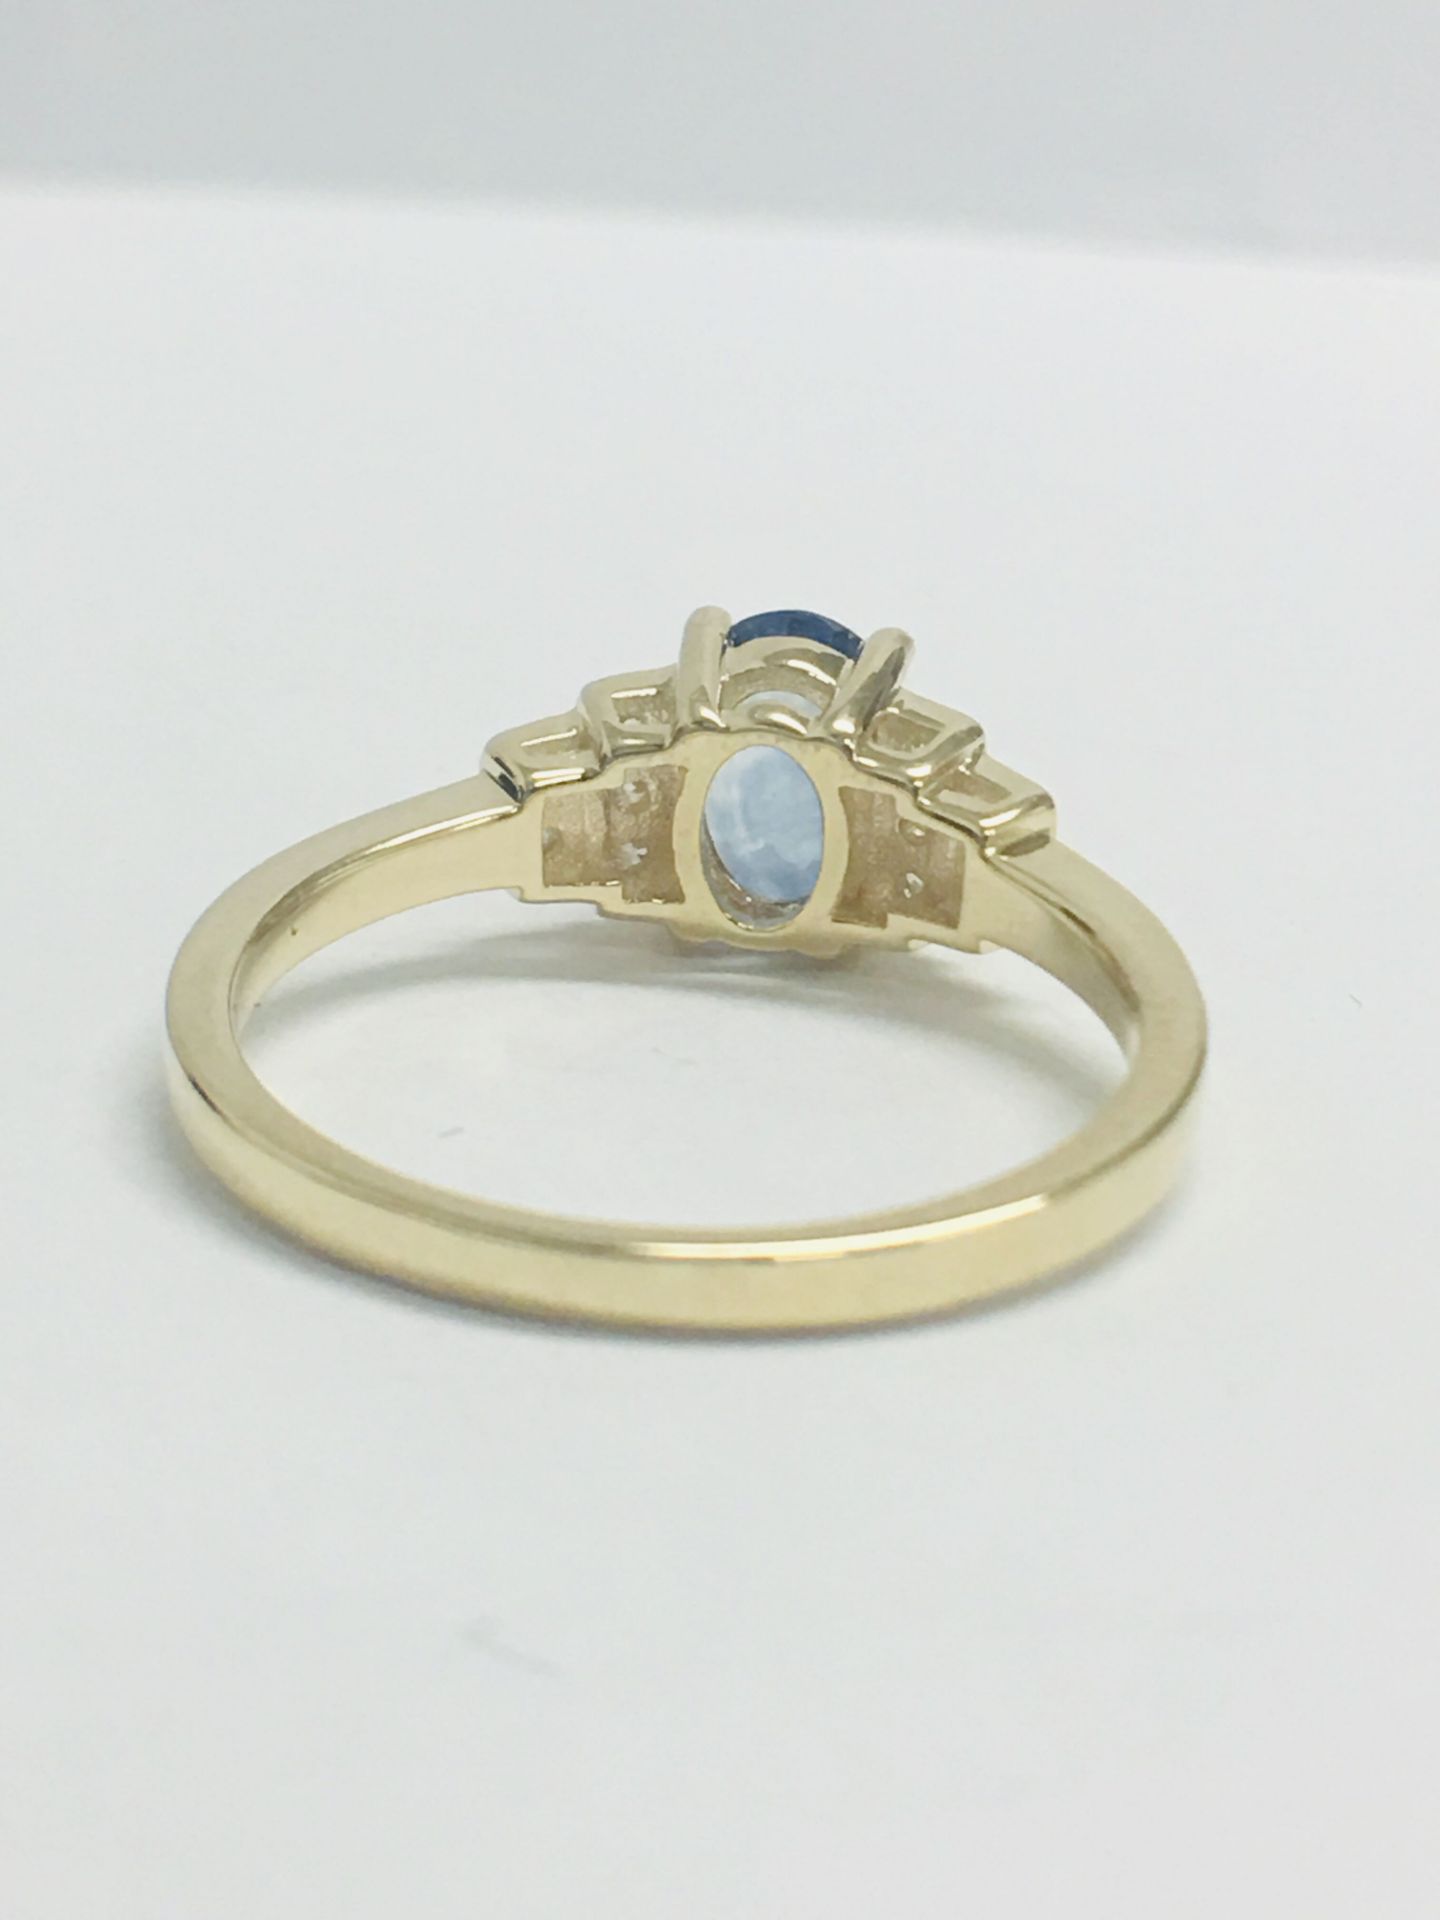 14ct Yellow Gold Sapphire and Diamond Ring. - Image 5 of 10